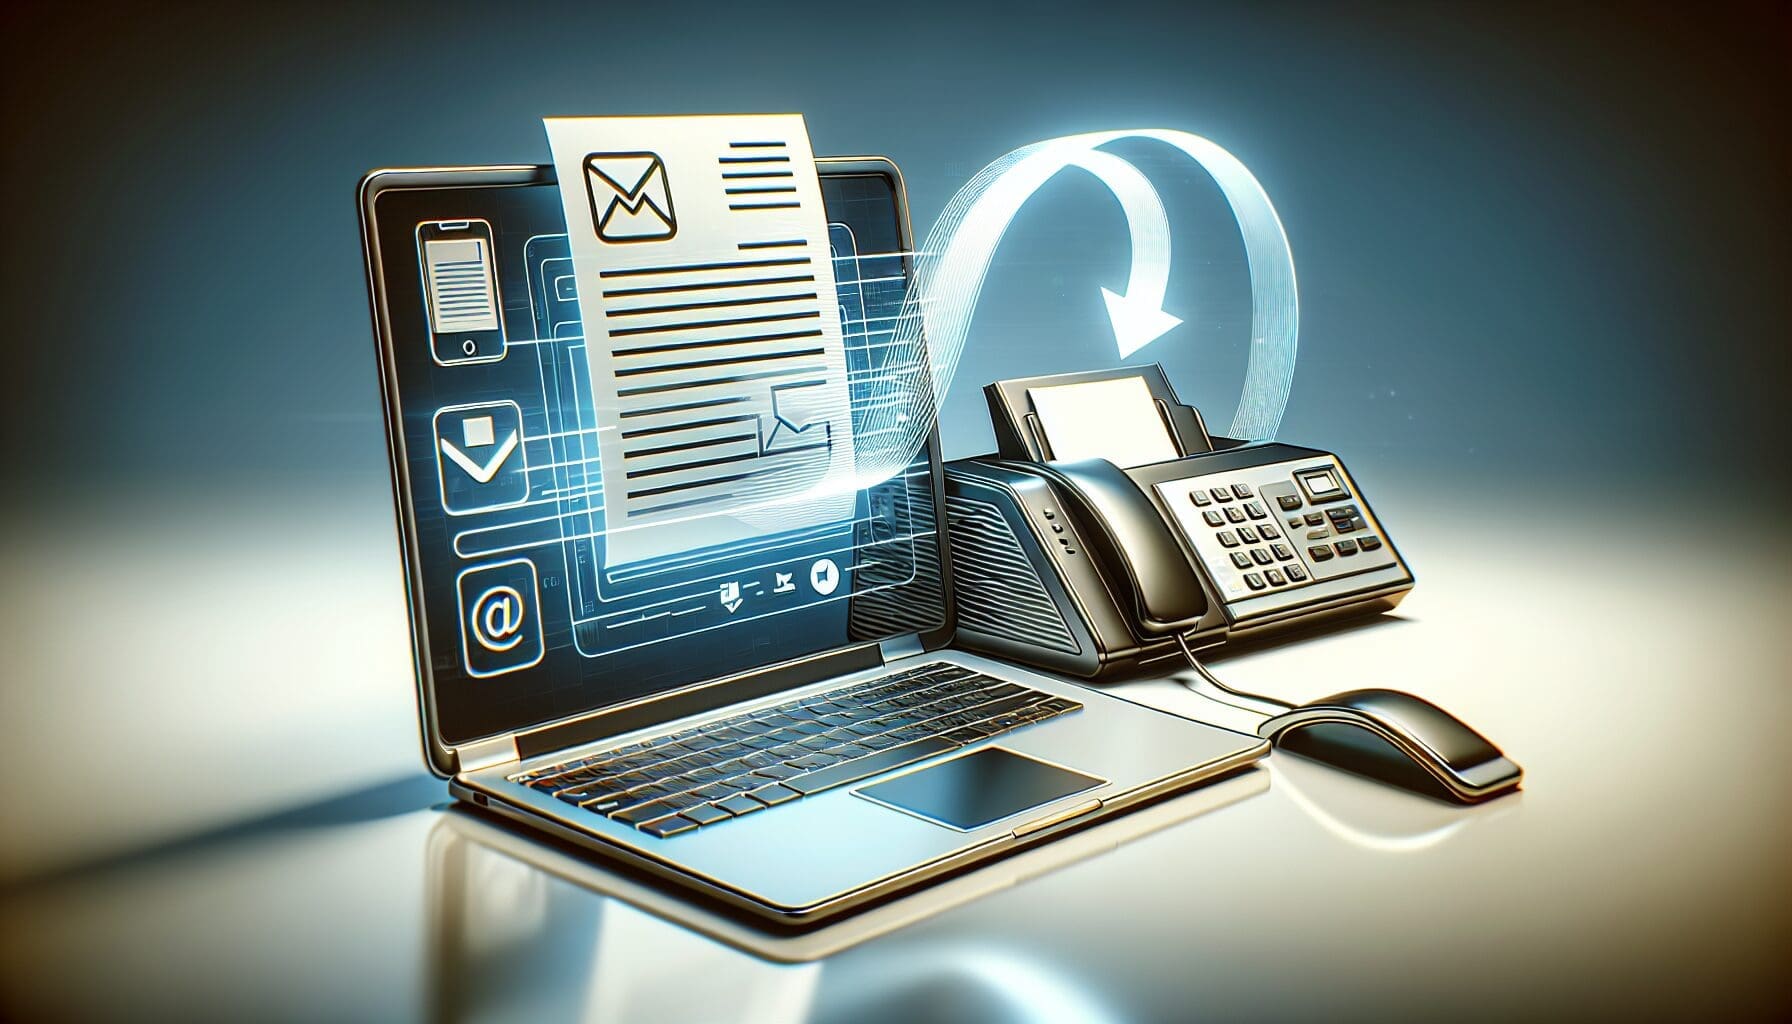 Illustration of sending a fax using email